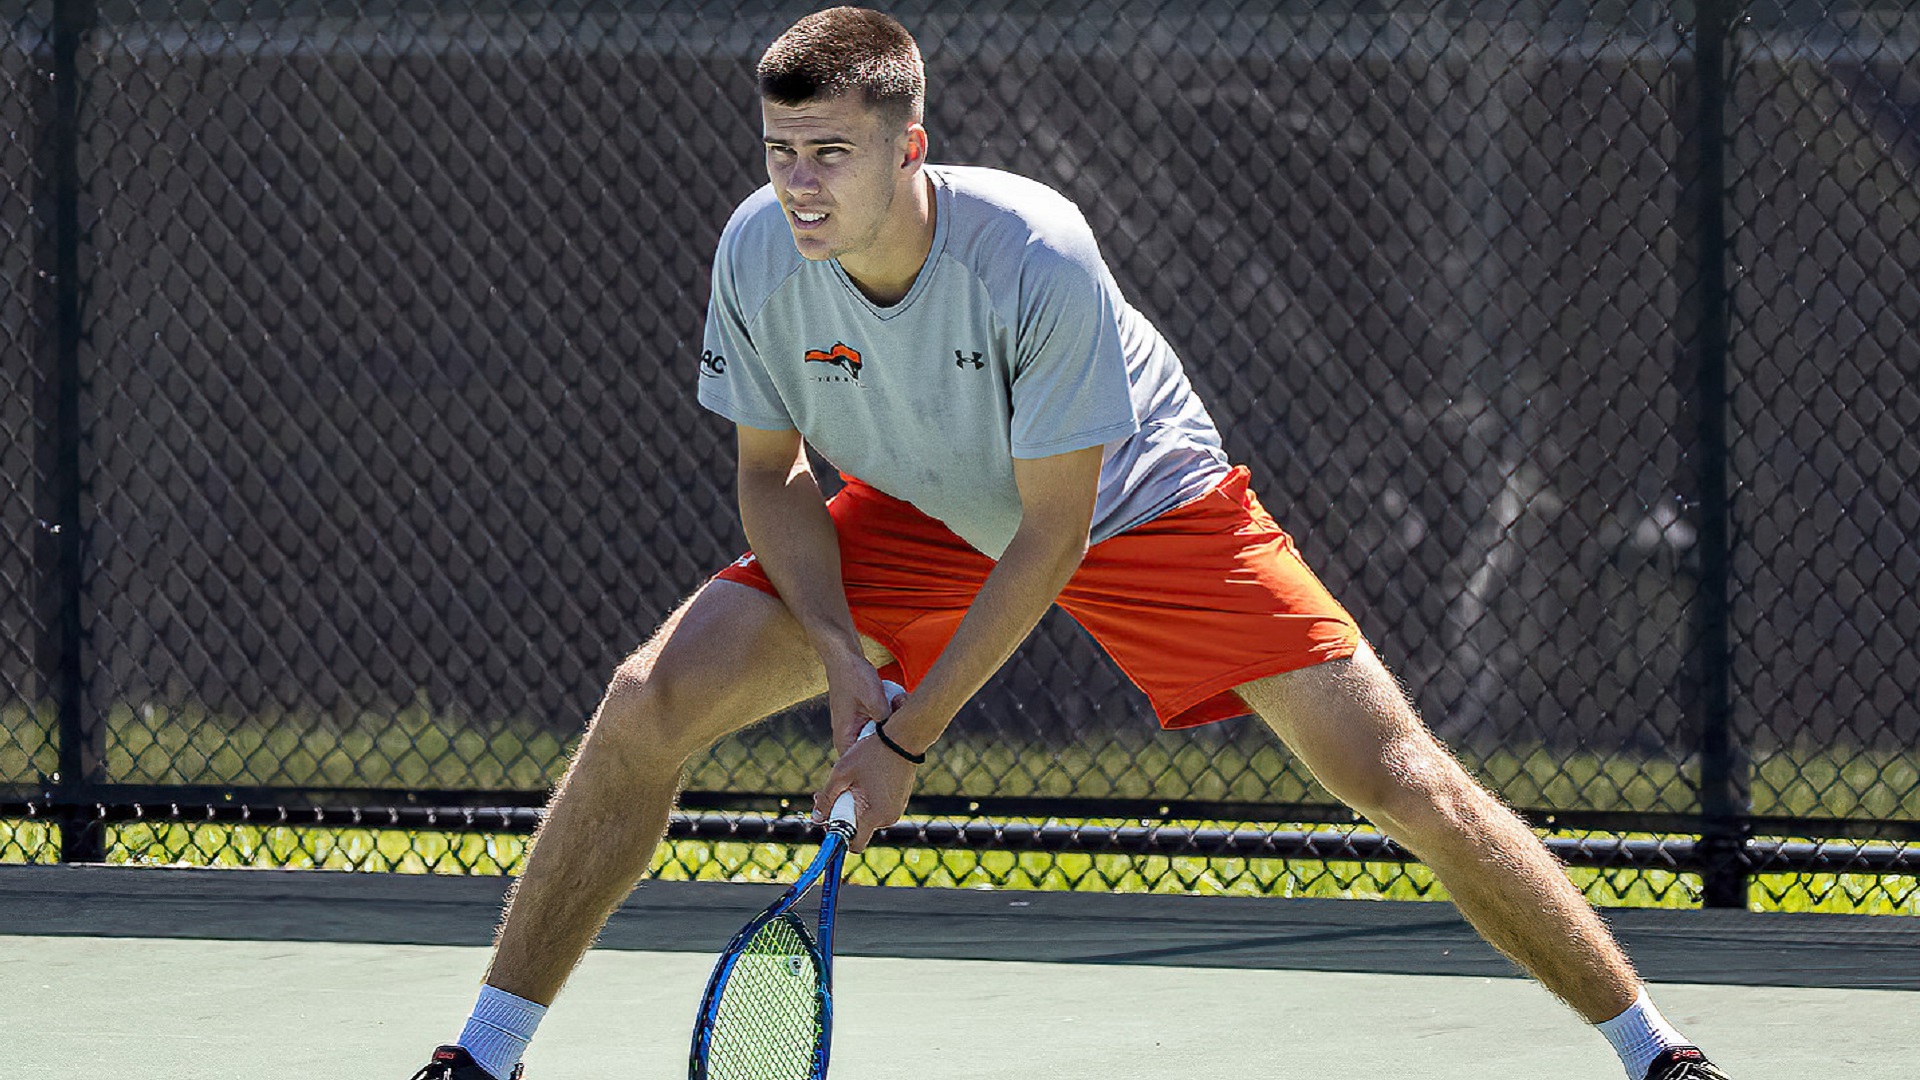 Nemanja Subanovic earned a straight-set win at #2 singles for the Pioneers (photo by Chuck Williams)